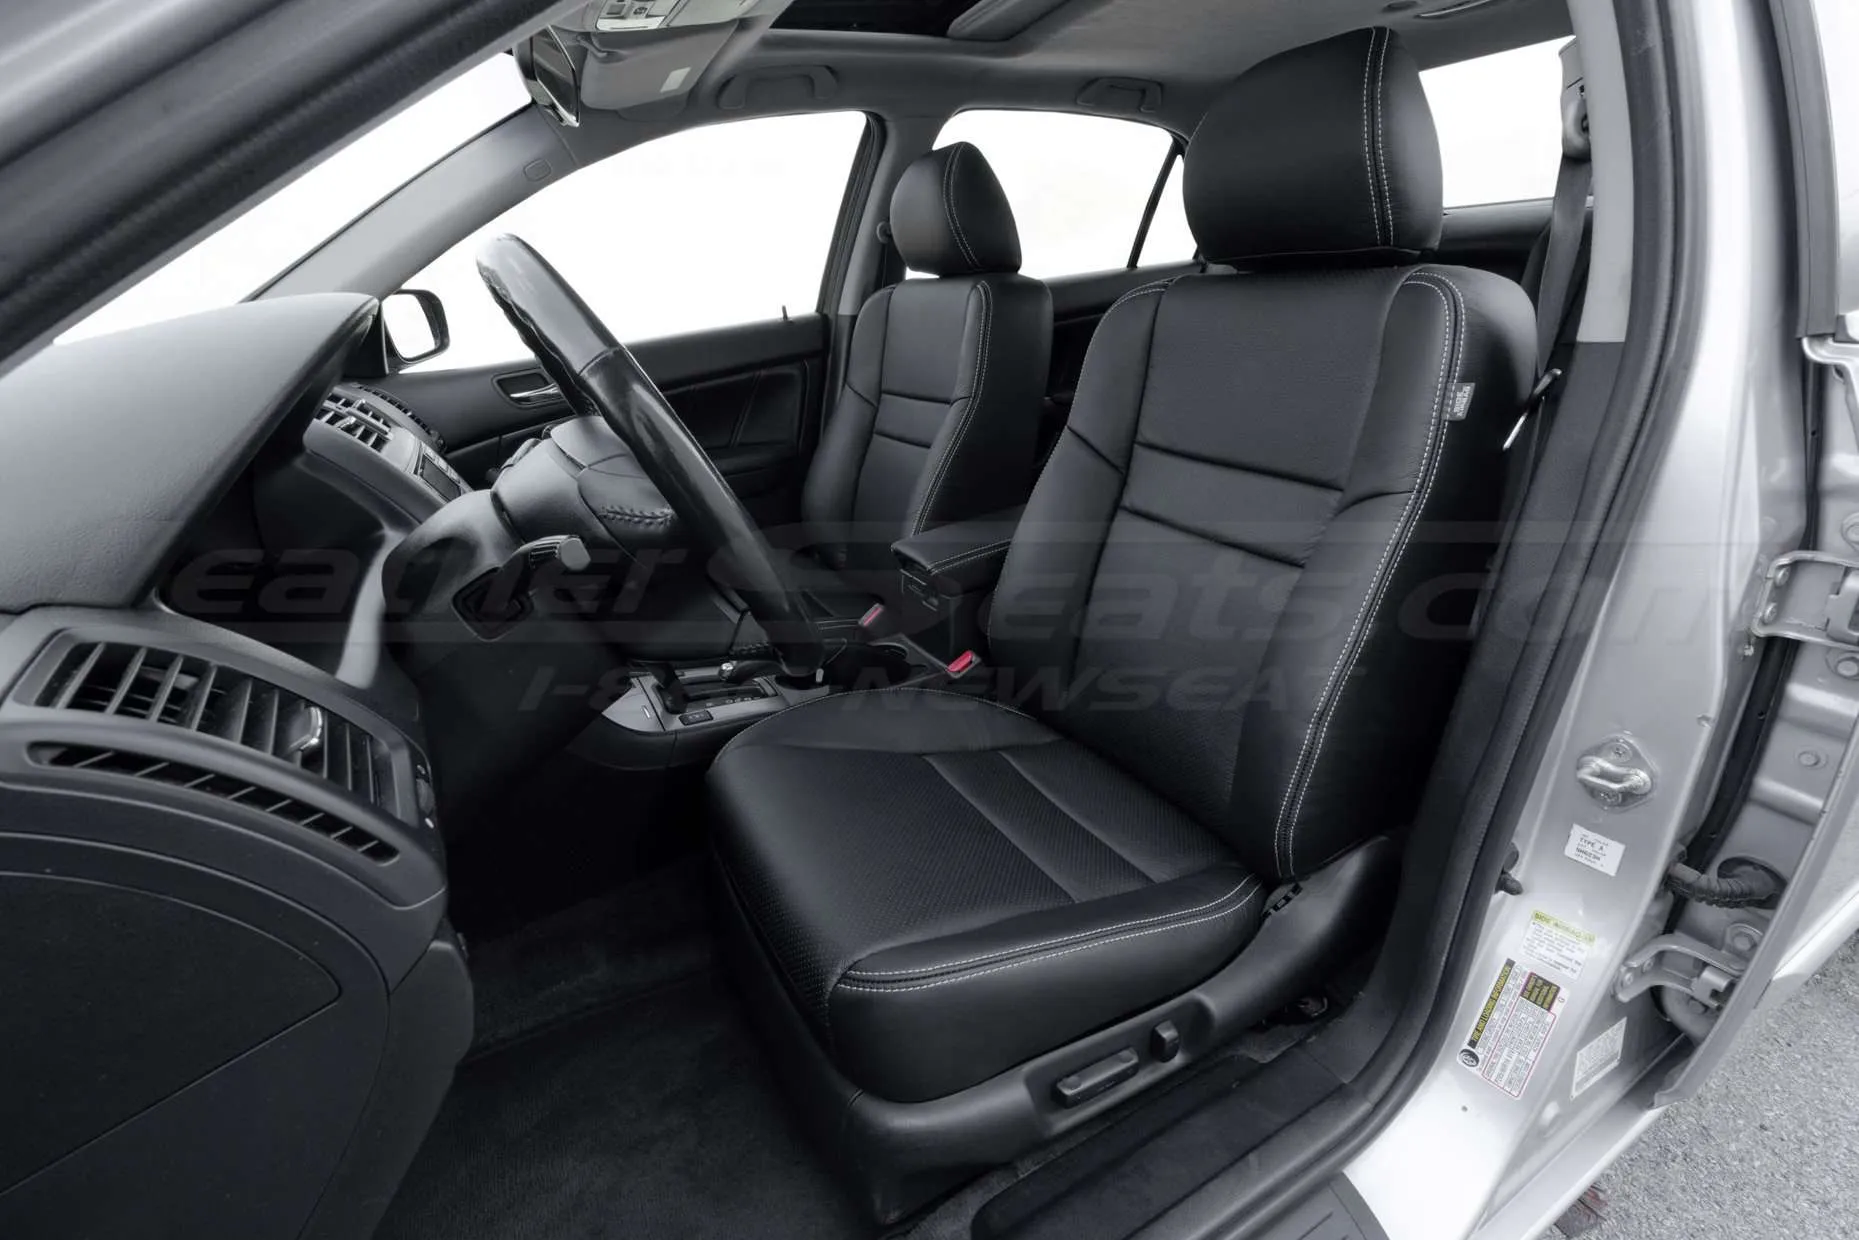 Honda Accord with Black leather seats installed - Front driver